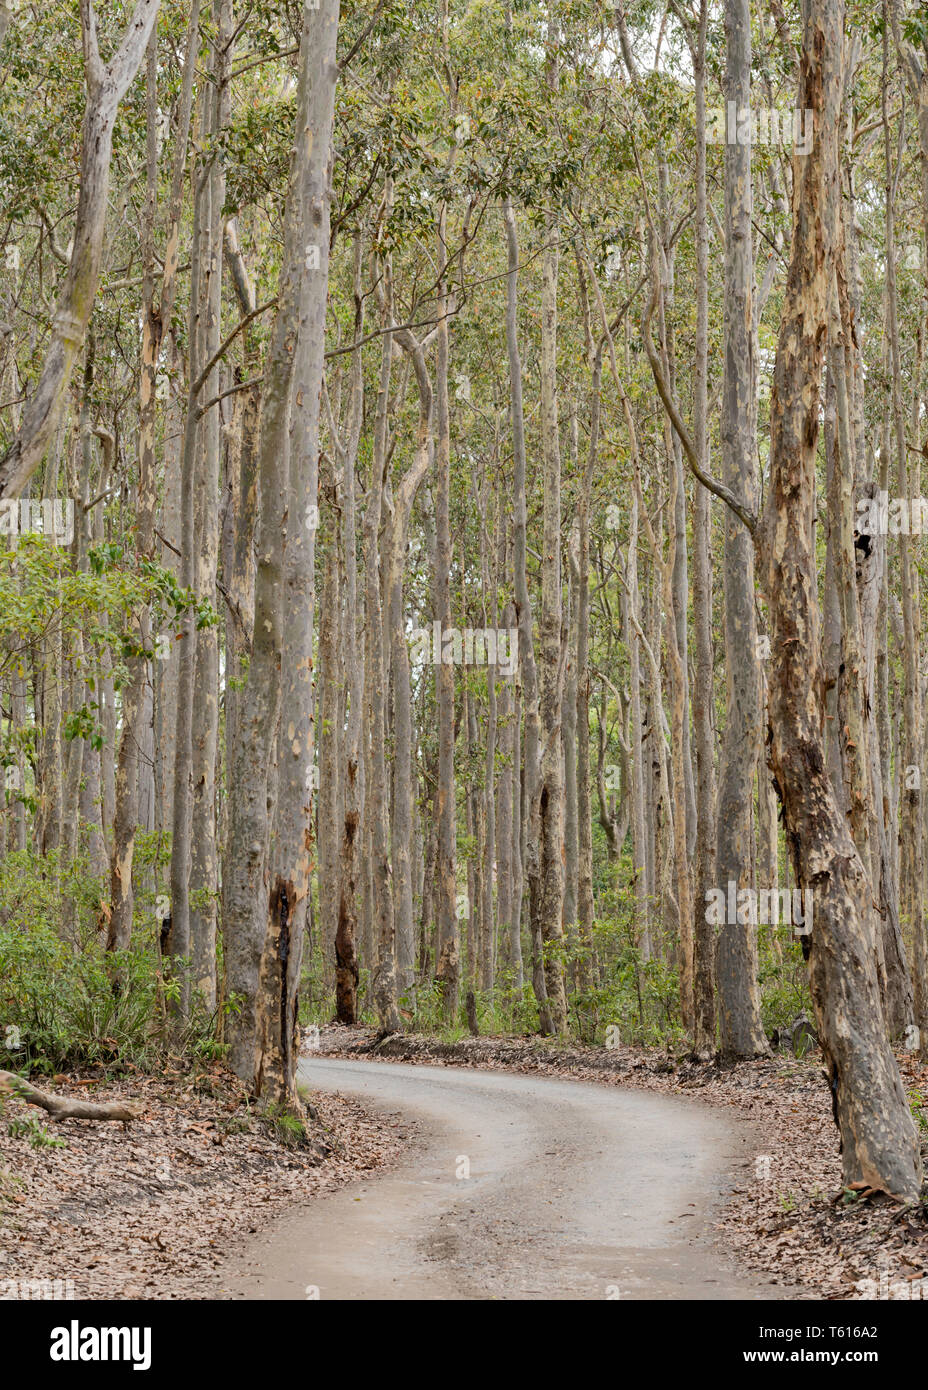 A dirt road or trail though a Eucalyptus Spotted Gum (Corymbia maculata) forest in Bawley Point on the New South Wales south coast of Australia Stock Photo